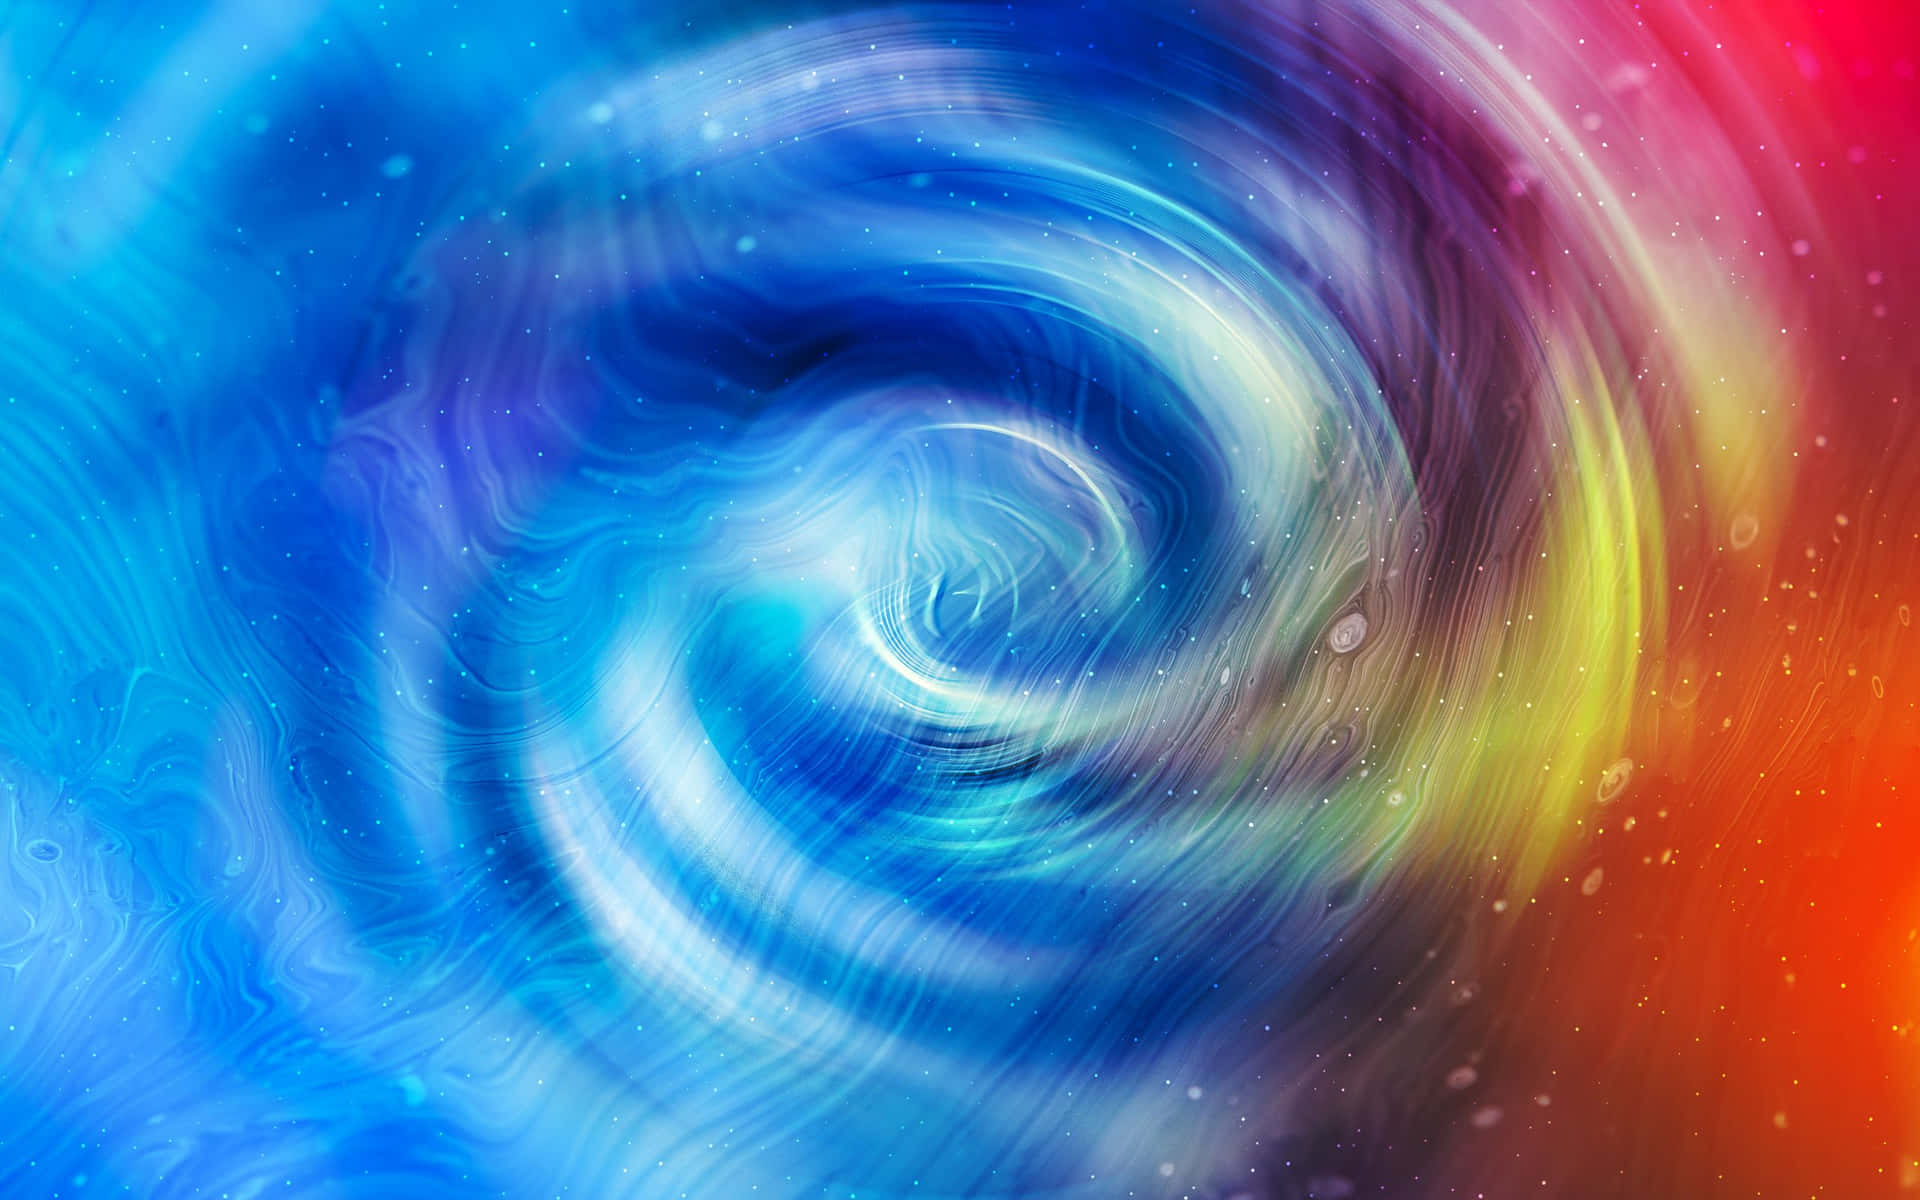 Enjoy the majesty of nature with this mesmerizing swirl. Wallpaper